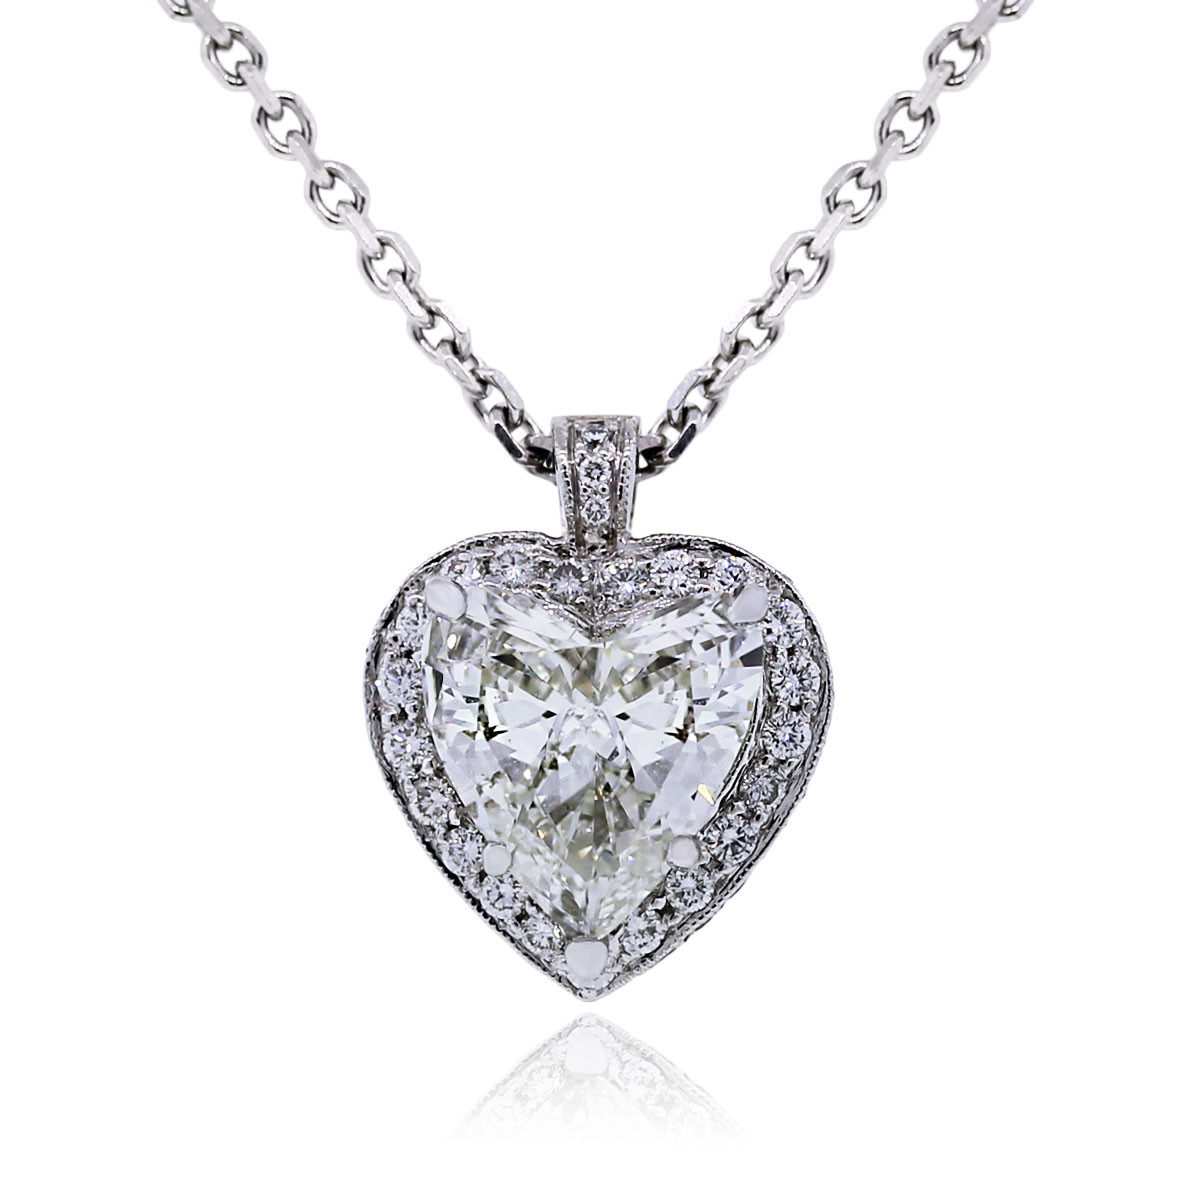 White Gold Necklace With Pendant
 14k White Gold 4 17ct GIA Certified Diamond Heart Pendant